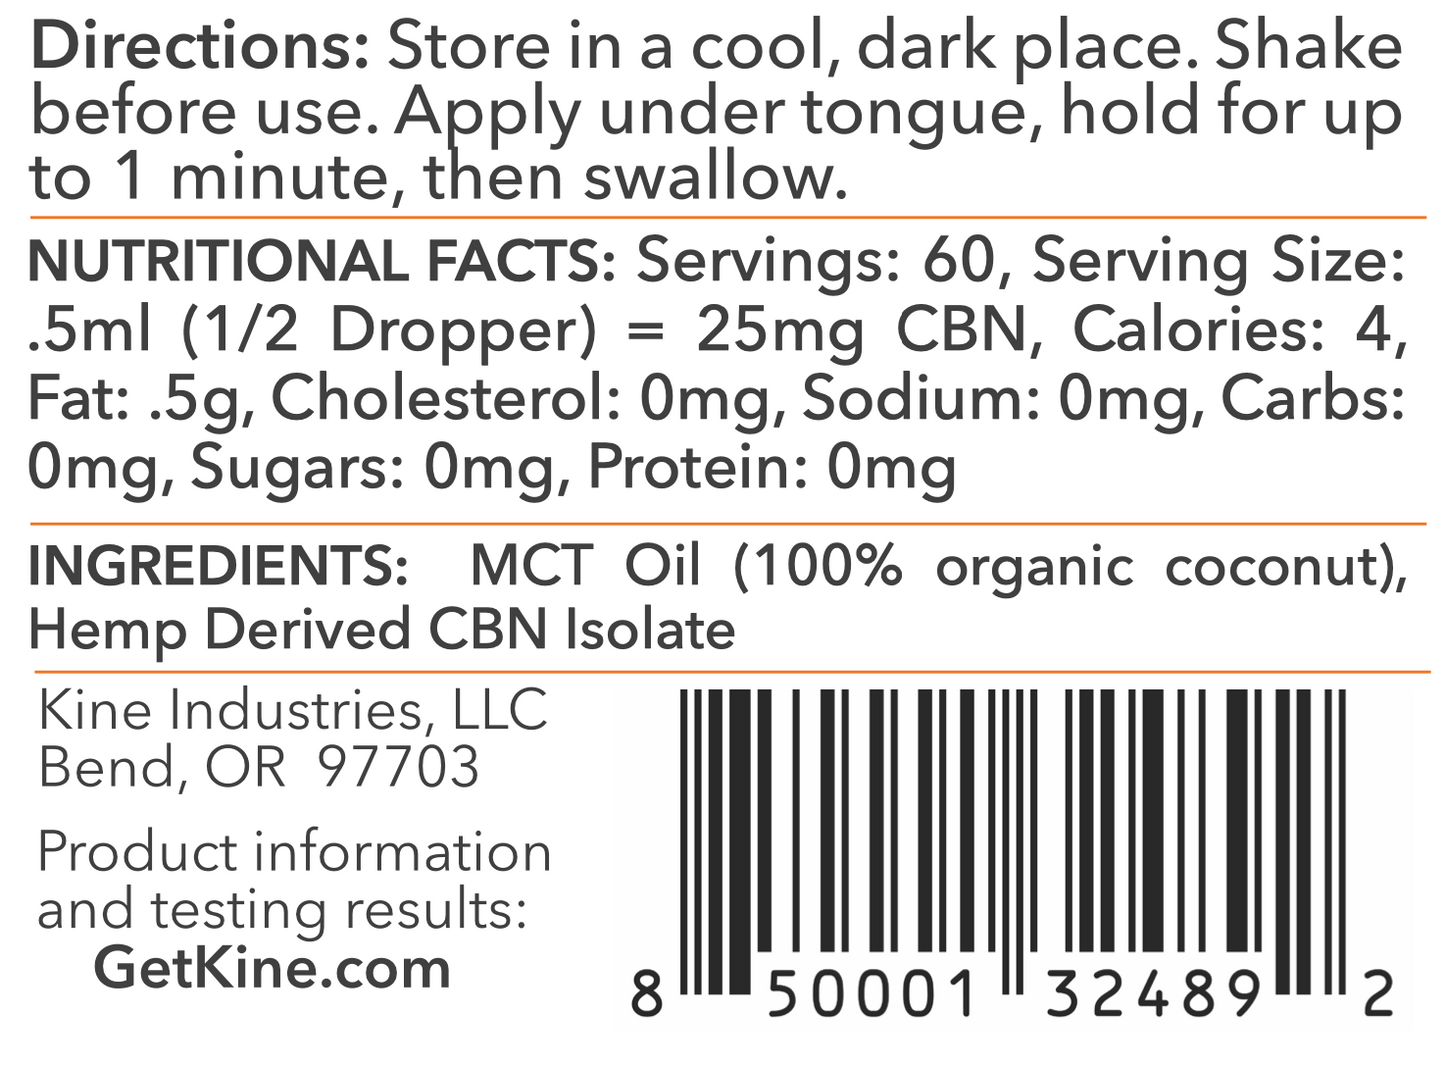 Kine Unflavored Neutral Organic CBN 1500mg tincture drops ingredients list and nutritional facts